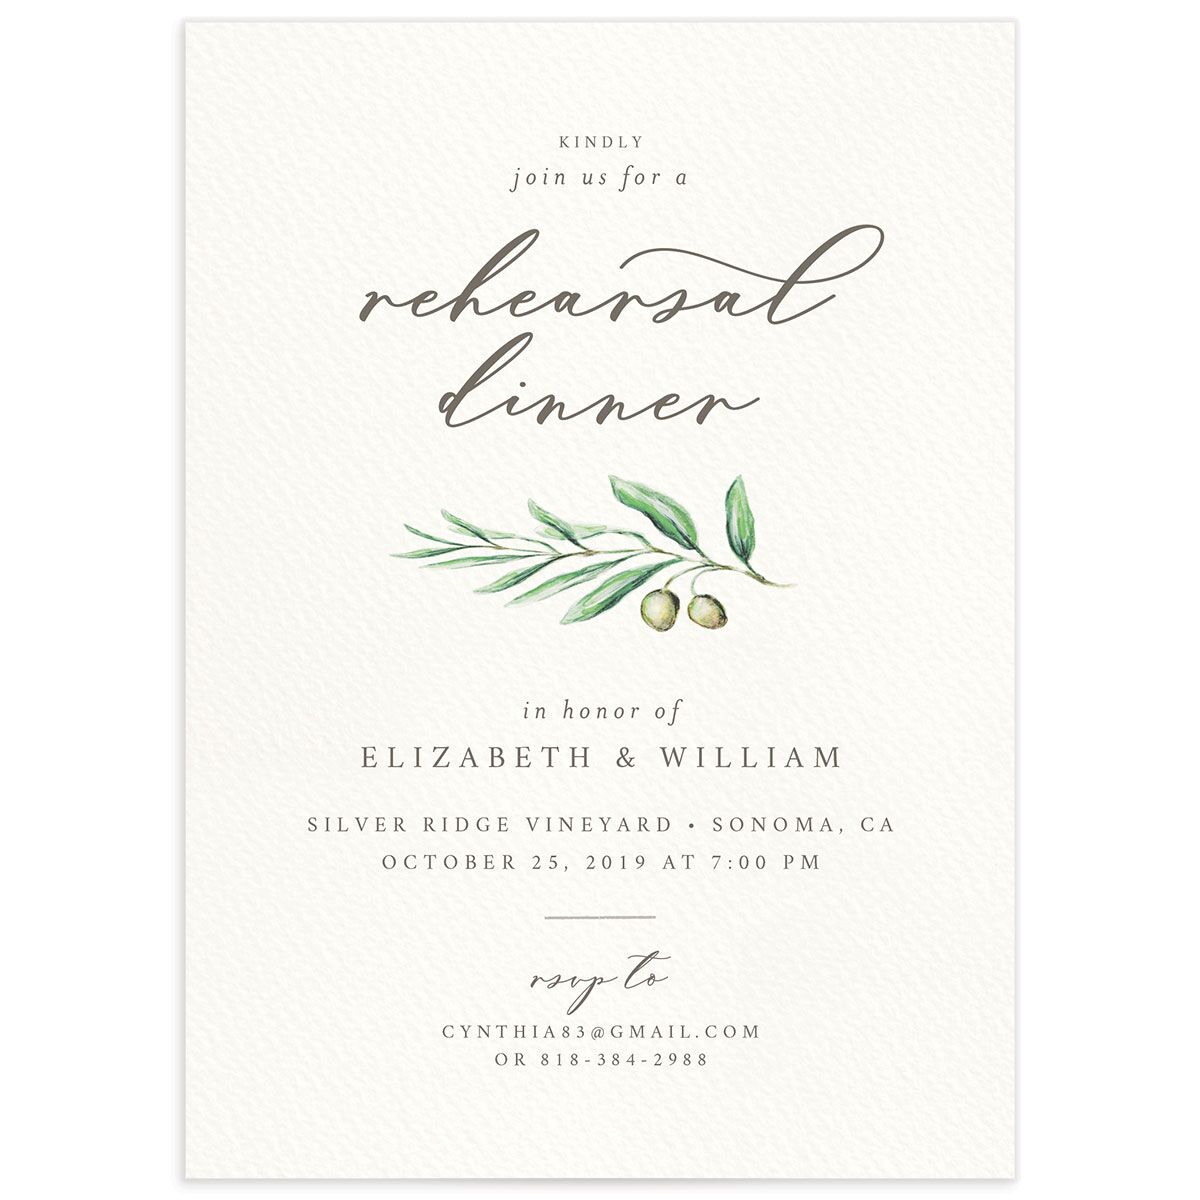 Painted Winery Rehearsal Dinner Invitations